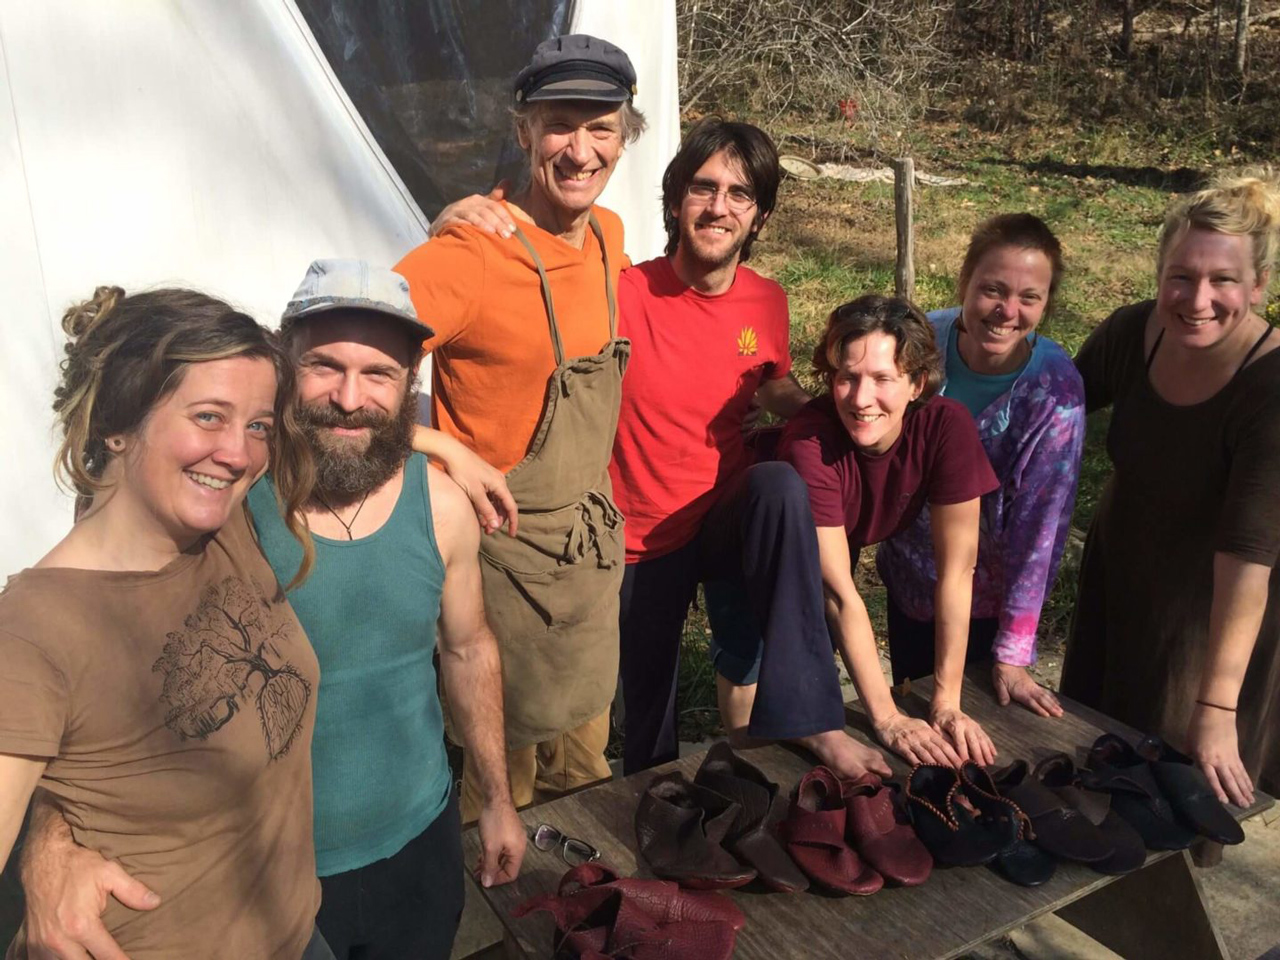 A shoemaking class at a North Carolina homestead with six students and their new shoes